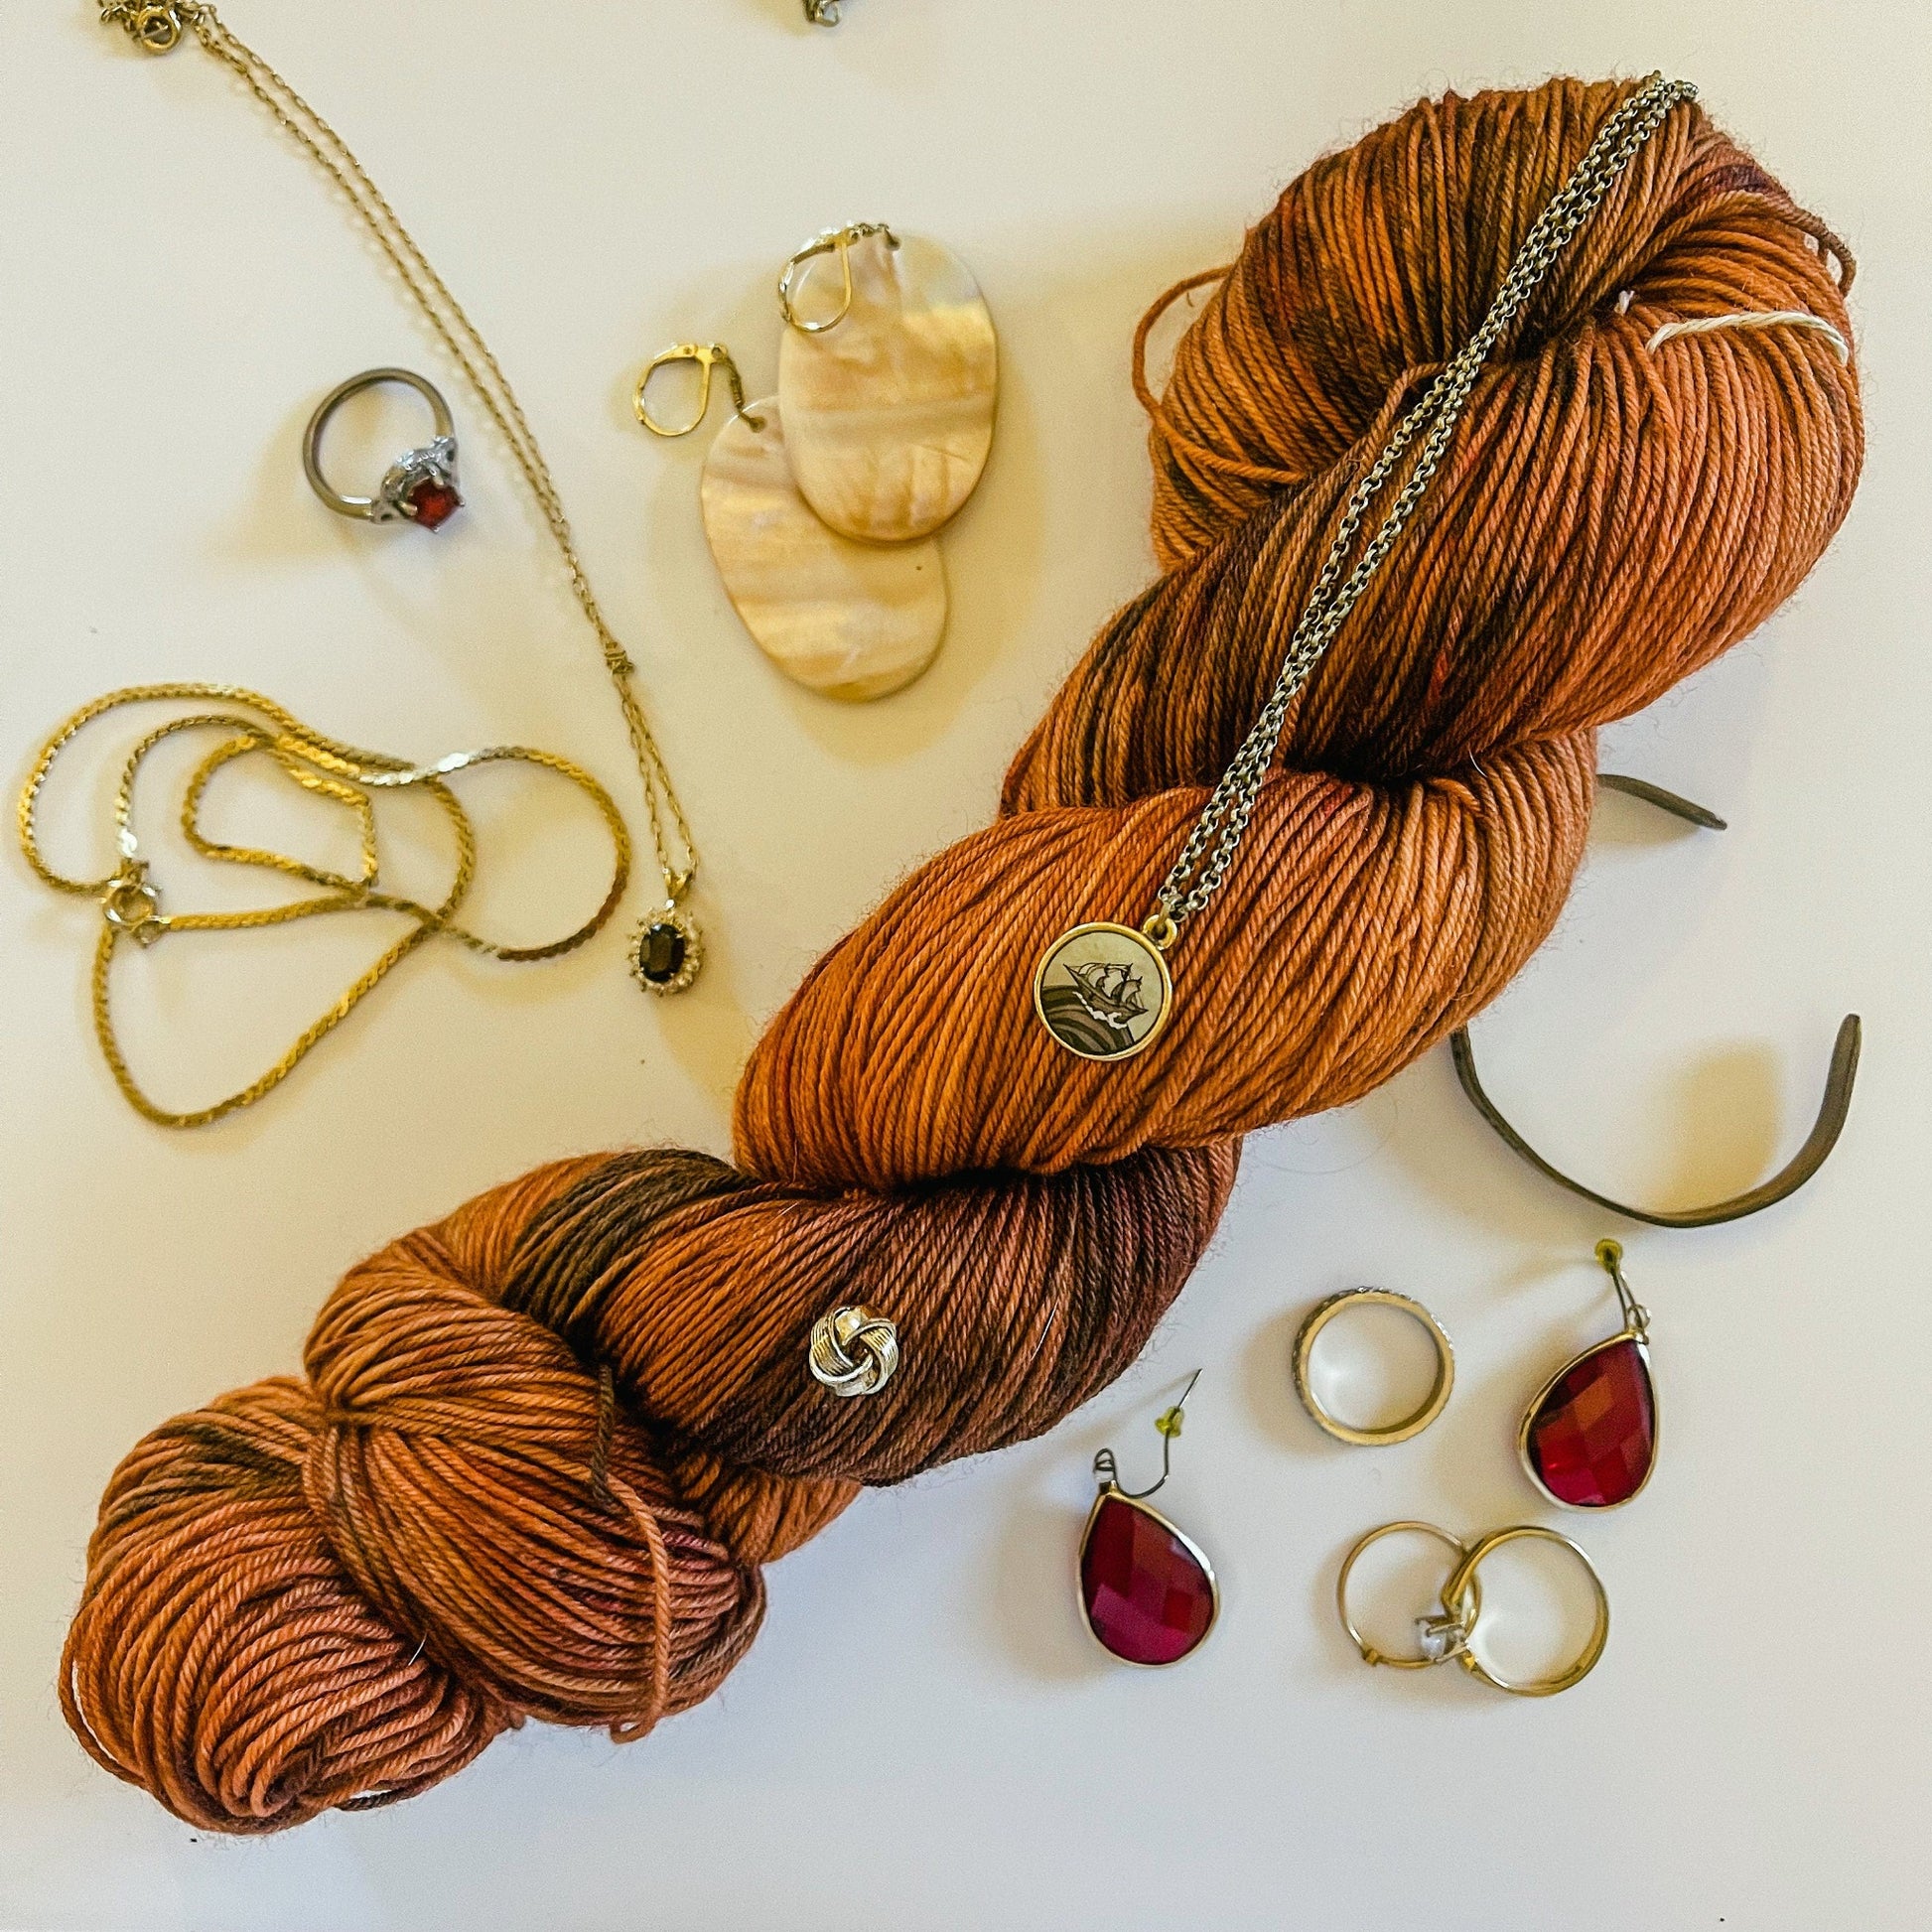 A coppery dark orange skein of  hand-dyed yarn with wide black speckles, surrounded by gold jewelry.